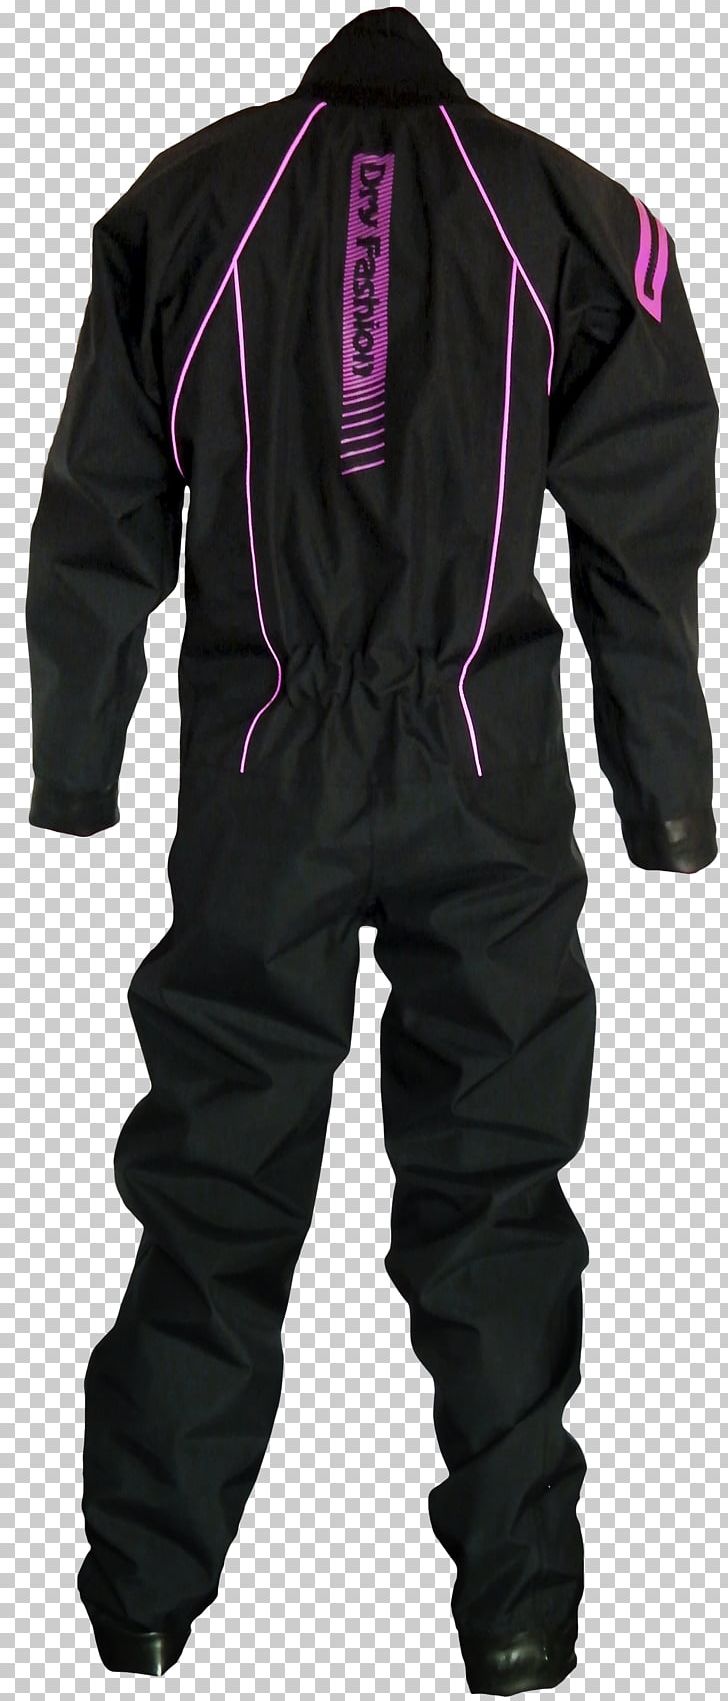 Dry Suit Standup Paddleboarding Paddling Wetsuit I-SUP PNG, Clipart, Boilersuit, Clothing, Costume, Dry Fashion Sportswear Gmbh, Miscellaneous Free PNG Download